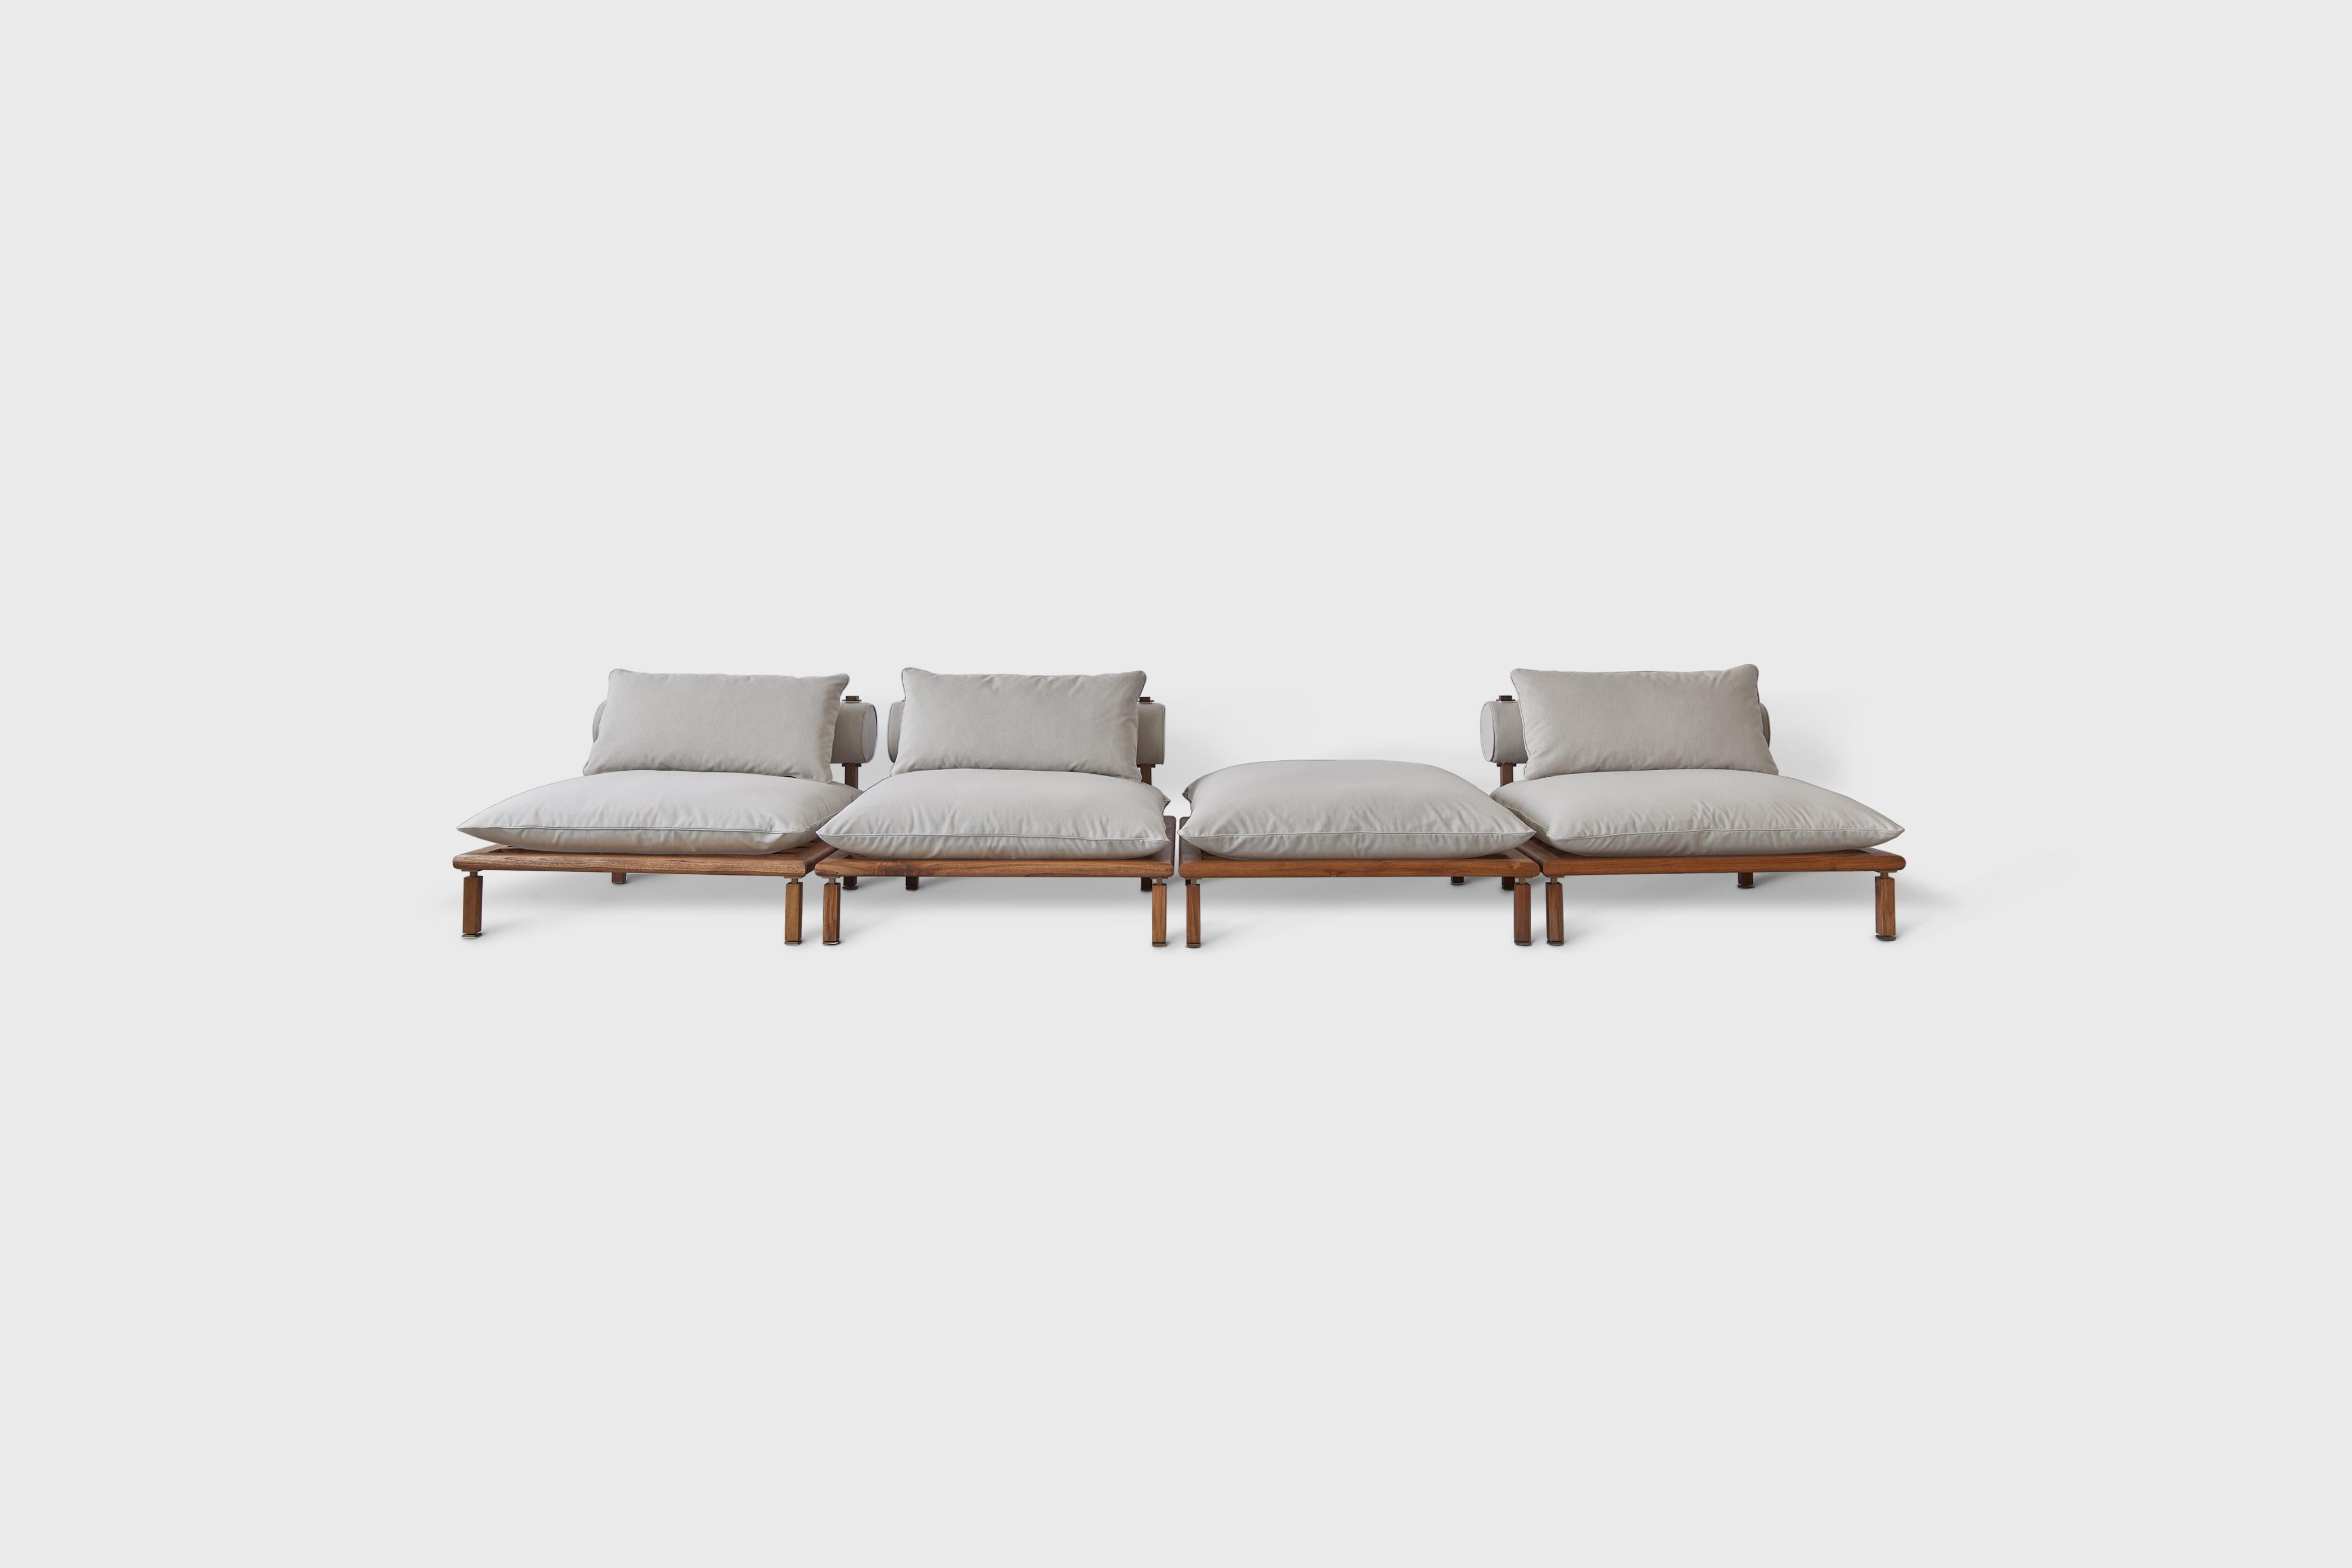 Nerthus outdoor sofa by Atra Design.
Dimensions: D 434 x W 108.5 x H 71.1 cm.
Materials: fabric, teak.
Different back and chaise module conbinations available.

3 x Back module
1 x Chaise module

Atra Design
We are Atra, a furniture brand